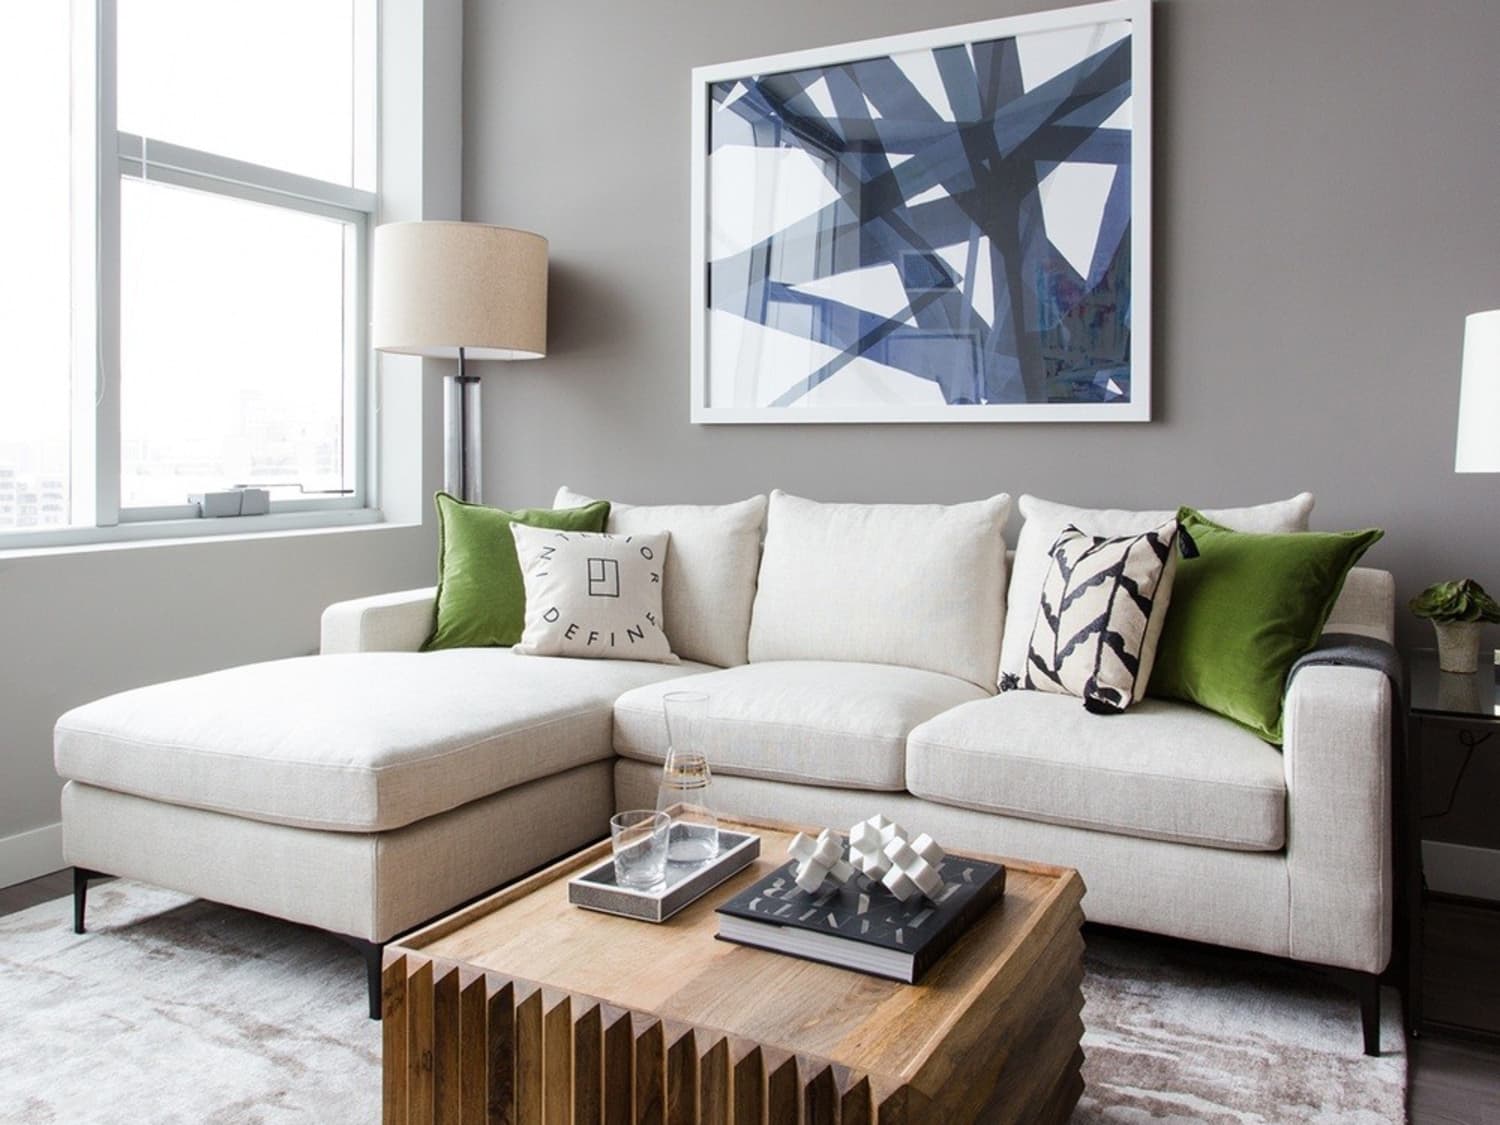 A modern living room featuring a grey sofa adorned with blue and grey cushions, a light grey coffee table with a white vase and book, and a side table with a white lamp. The walls are decorated with two framed circular art pieces. A large window brightens the space.